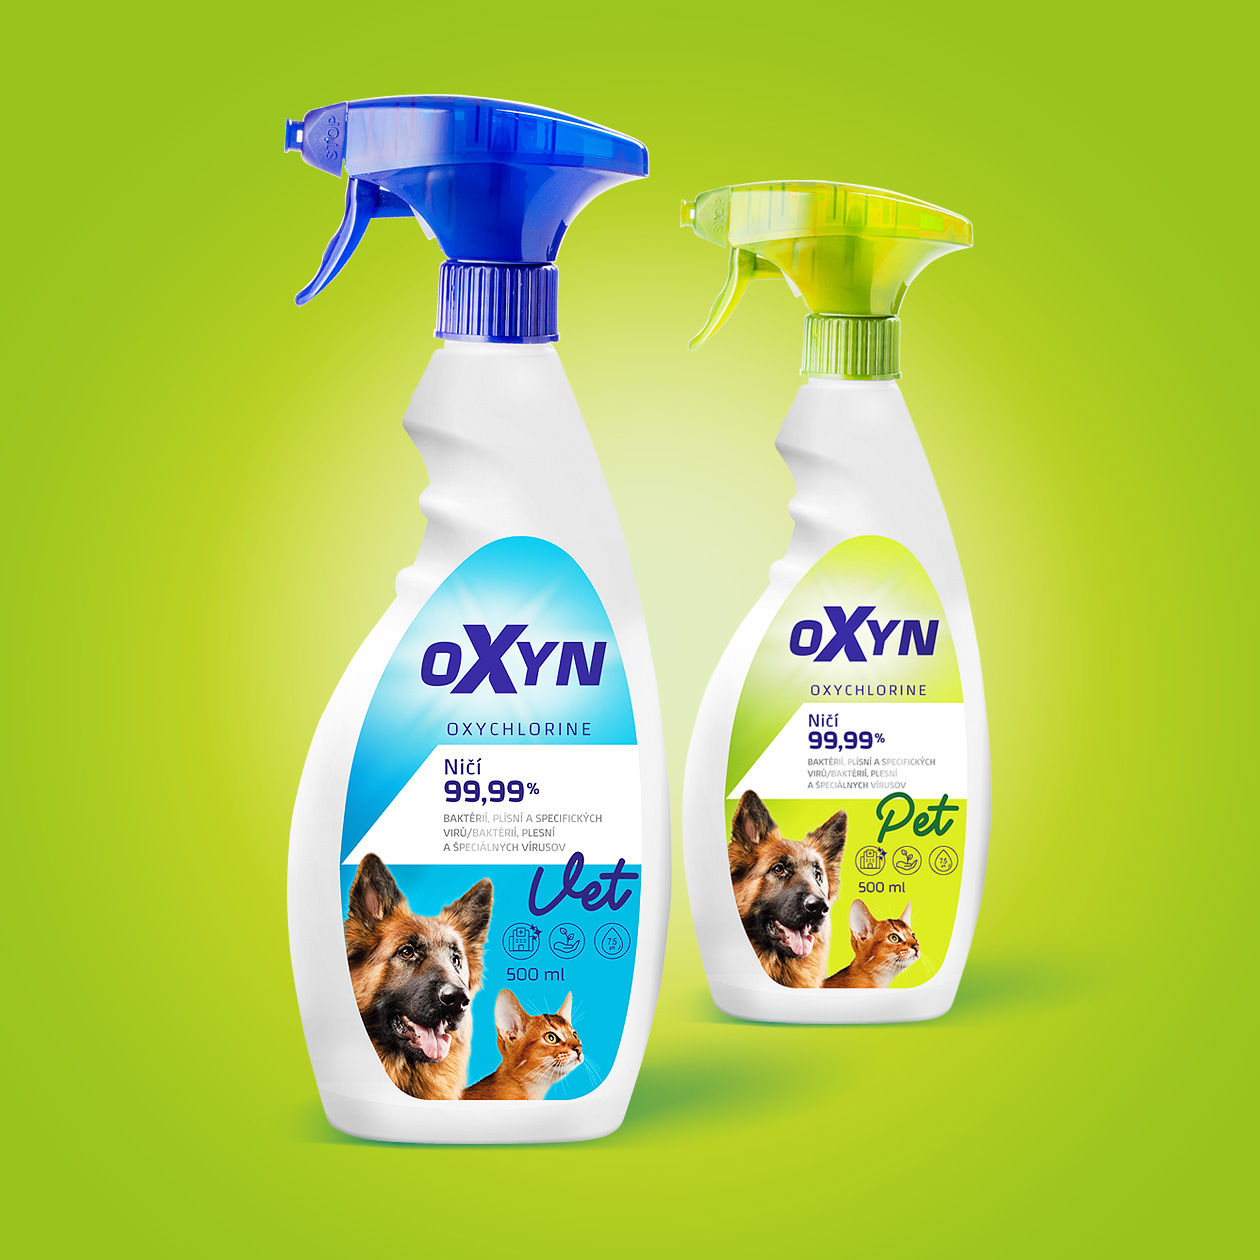 packaging oxyn veterinary cleaner